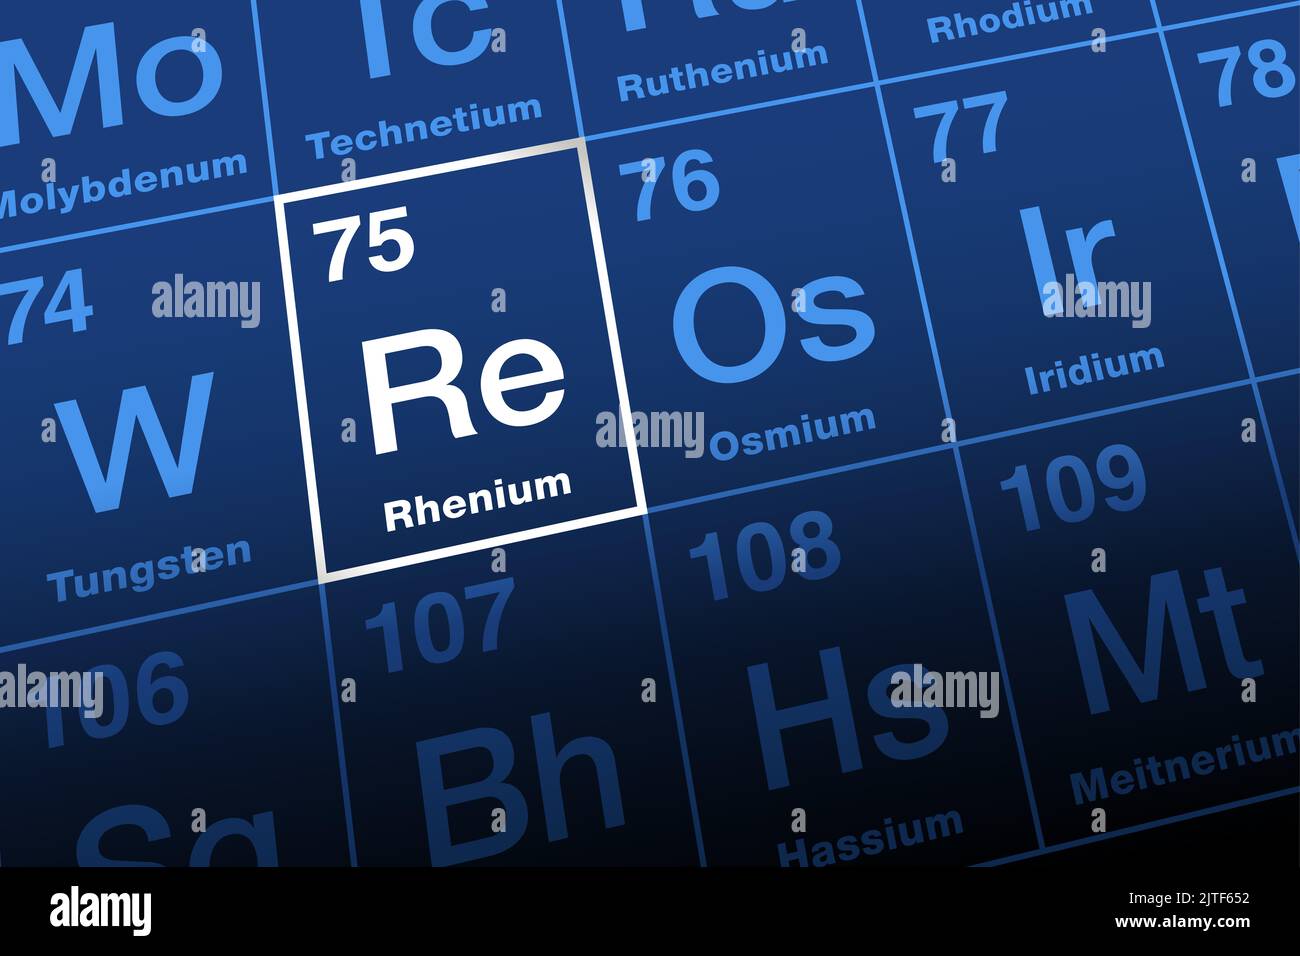 Rhenium on periodic table. Transition metal, named after the river Rhine, with element symbol Re and atomic number 75. One of the rarest elements. Stock Photo